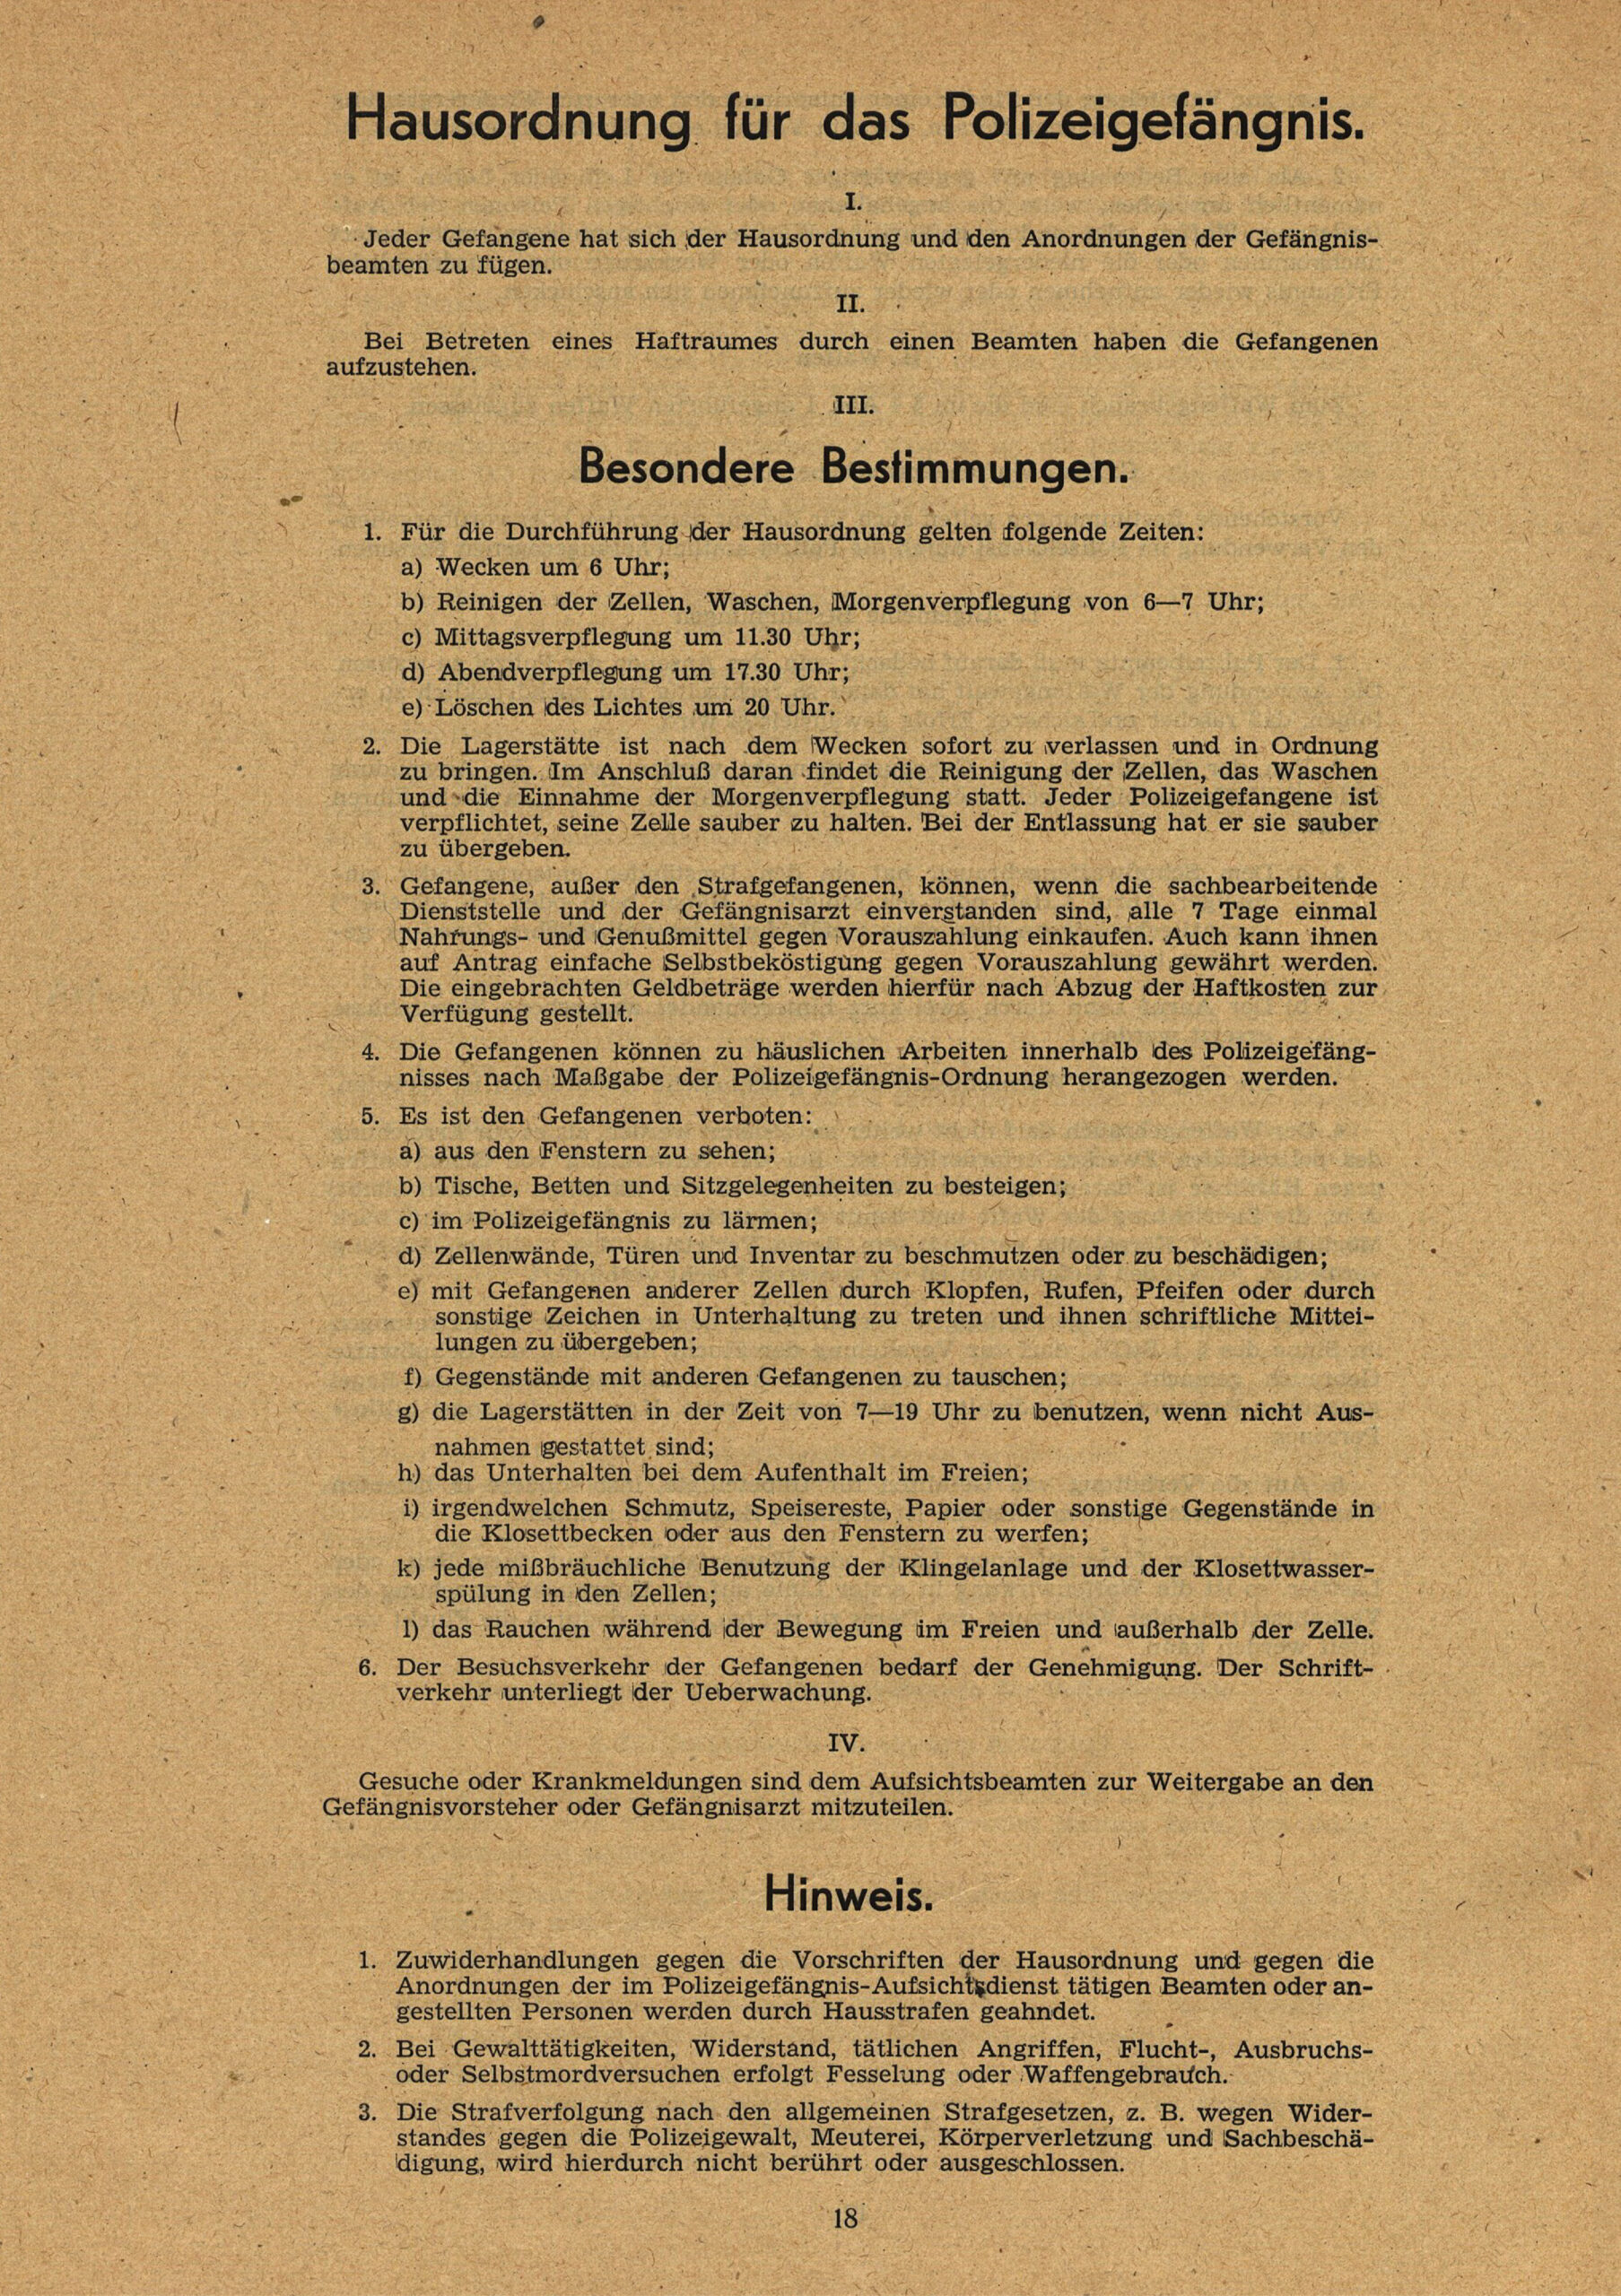 House rules of the Klapperfeld police prison, after 1945